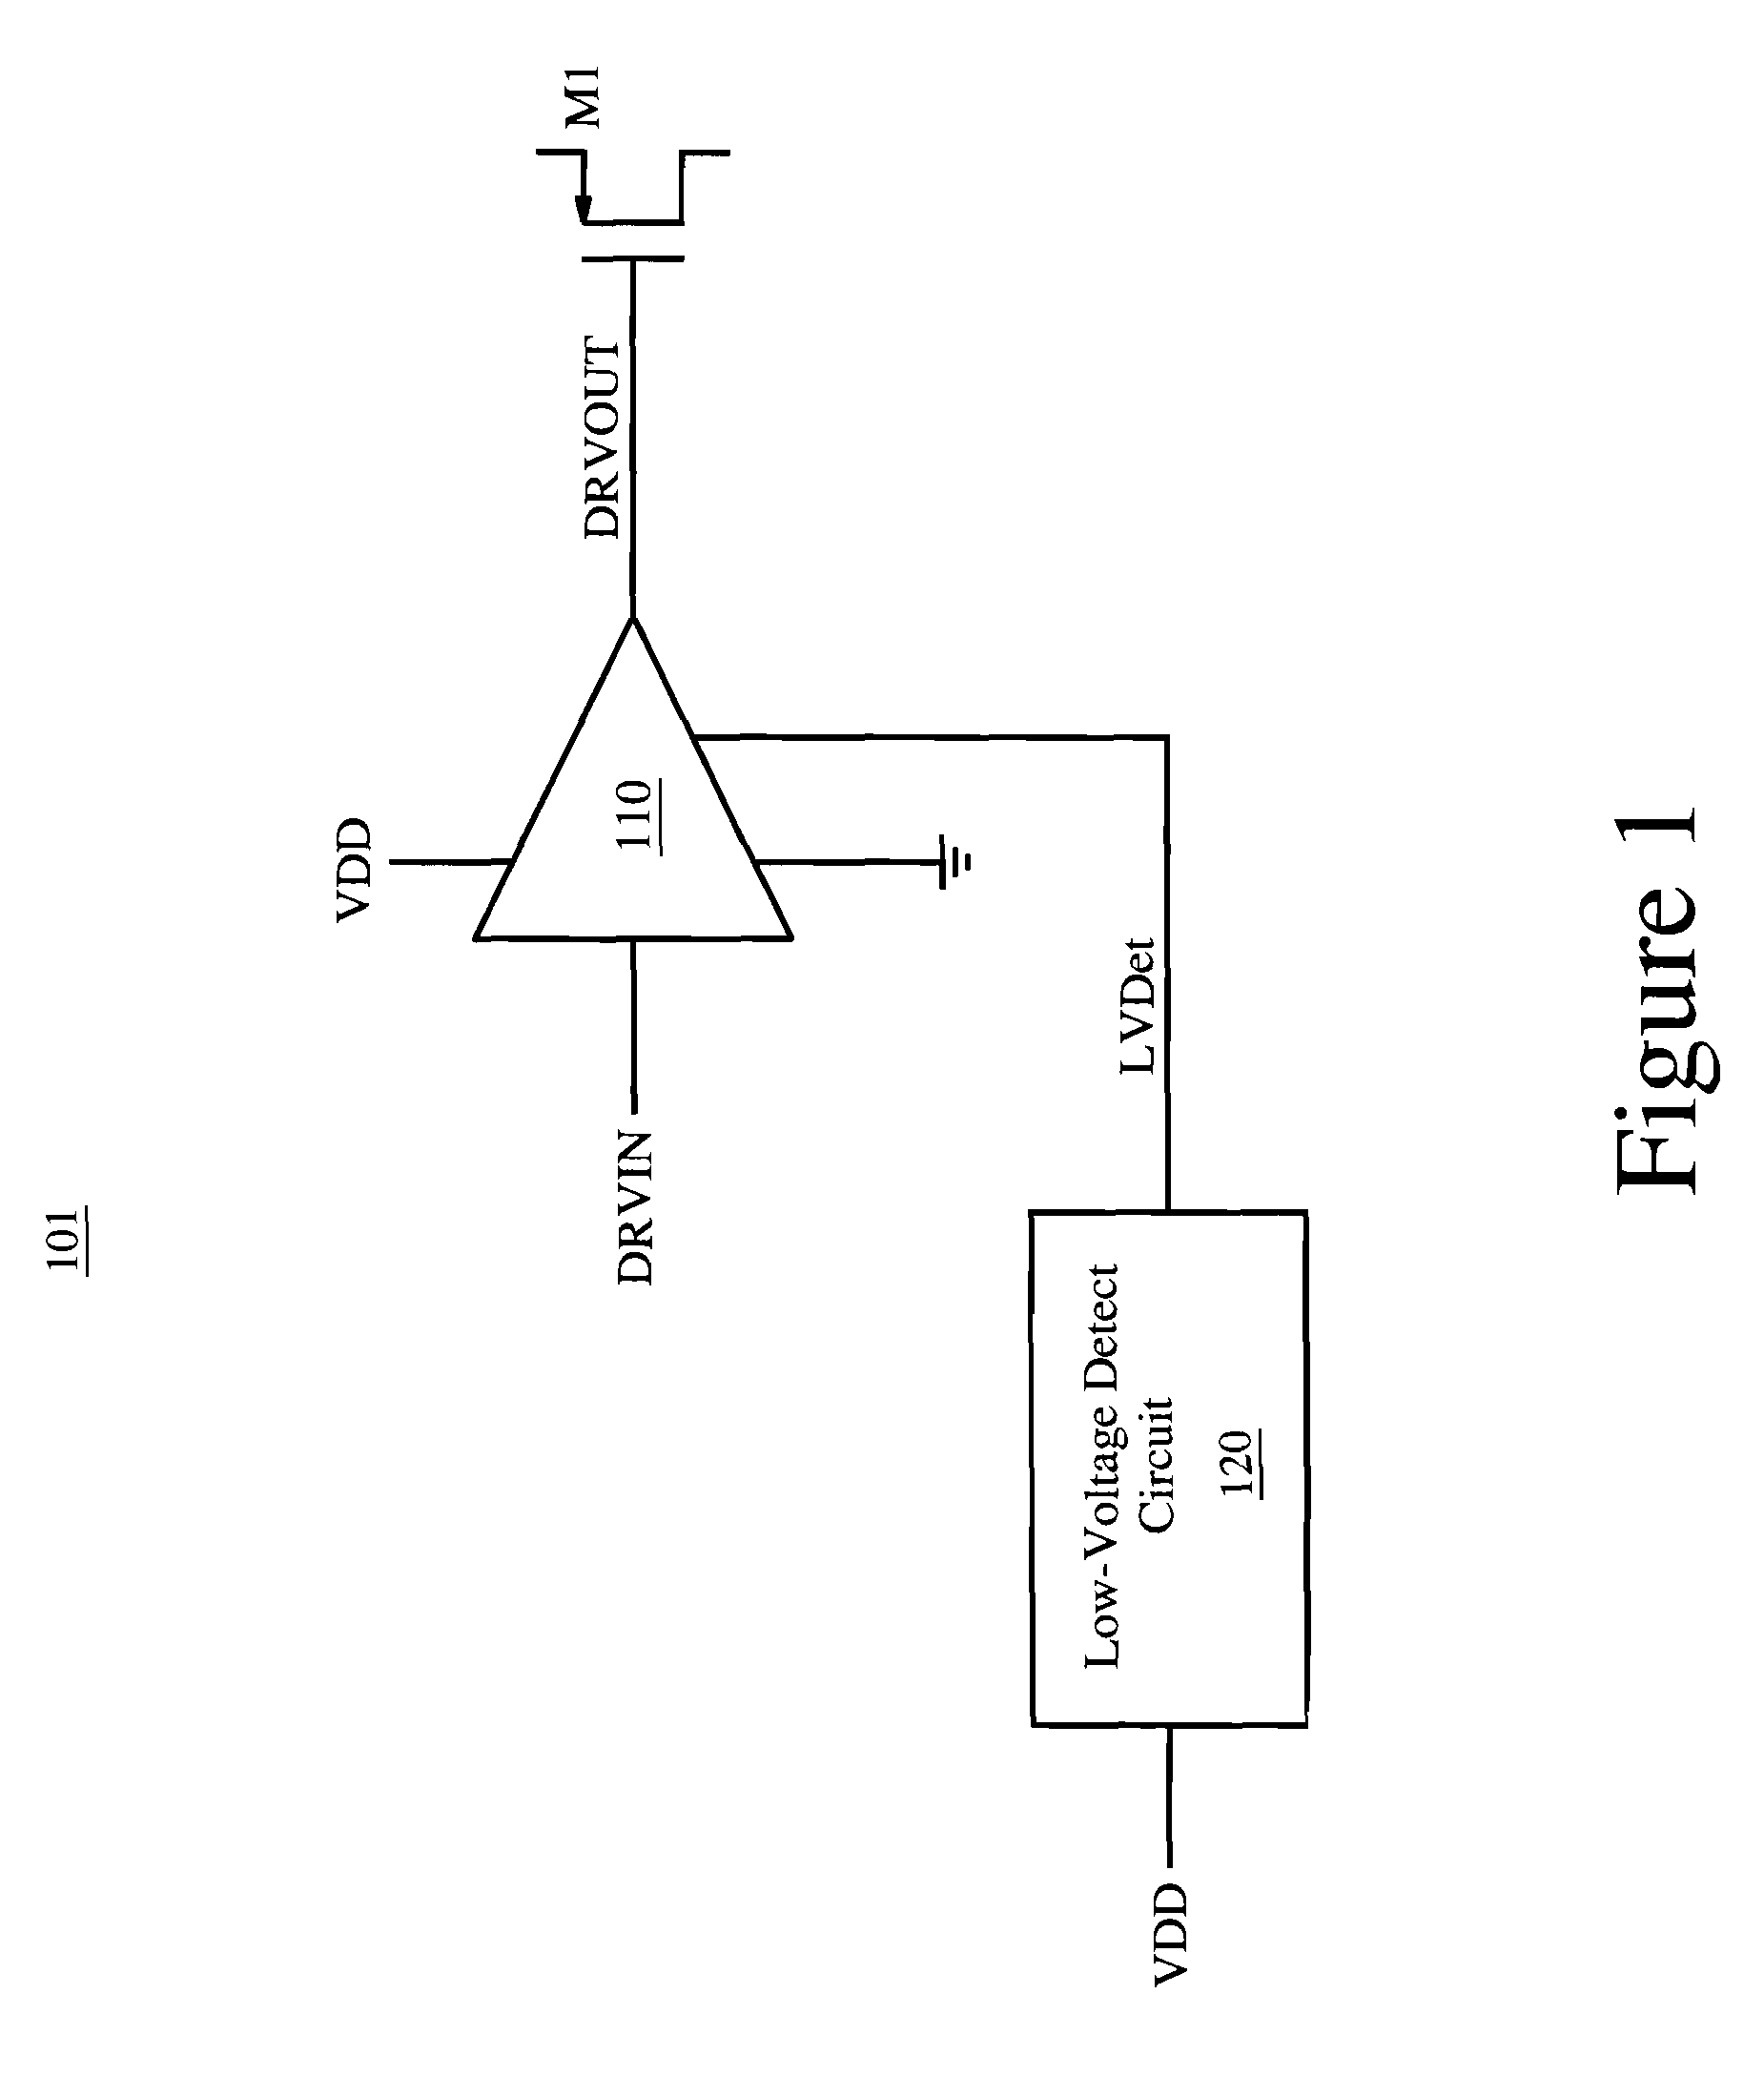 Apparatus and method for a driver with an adaptive drive strength for a class D amplifier